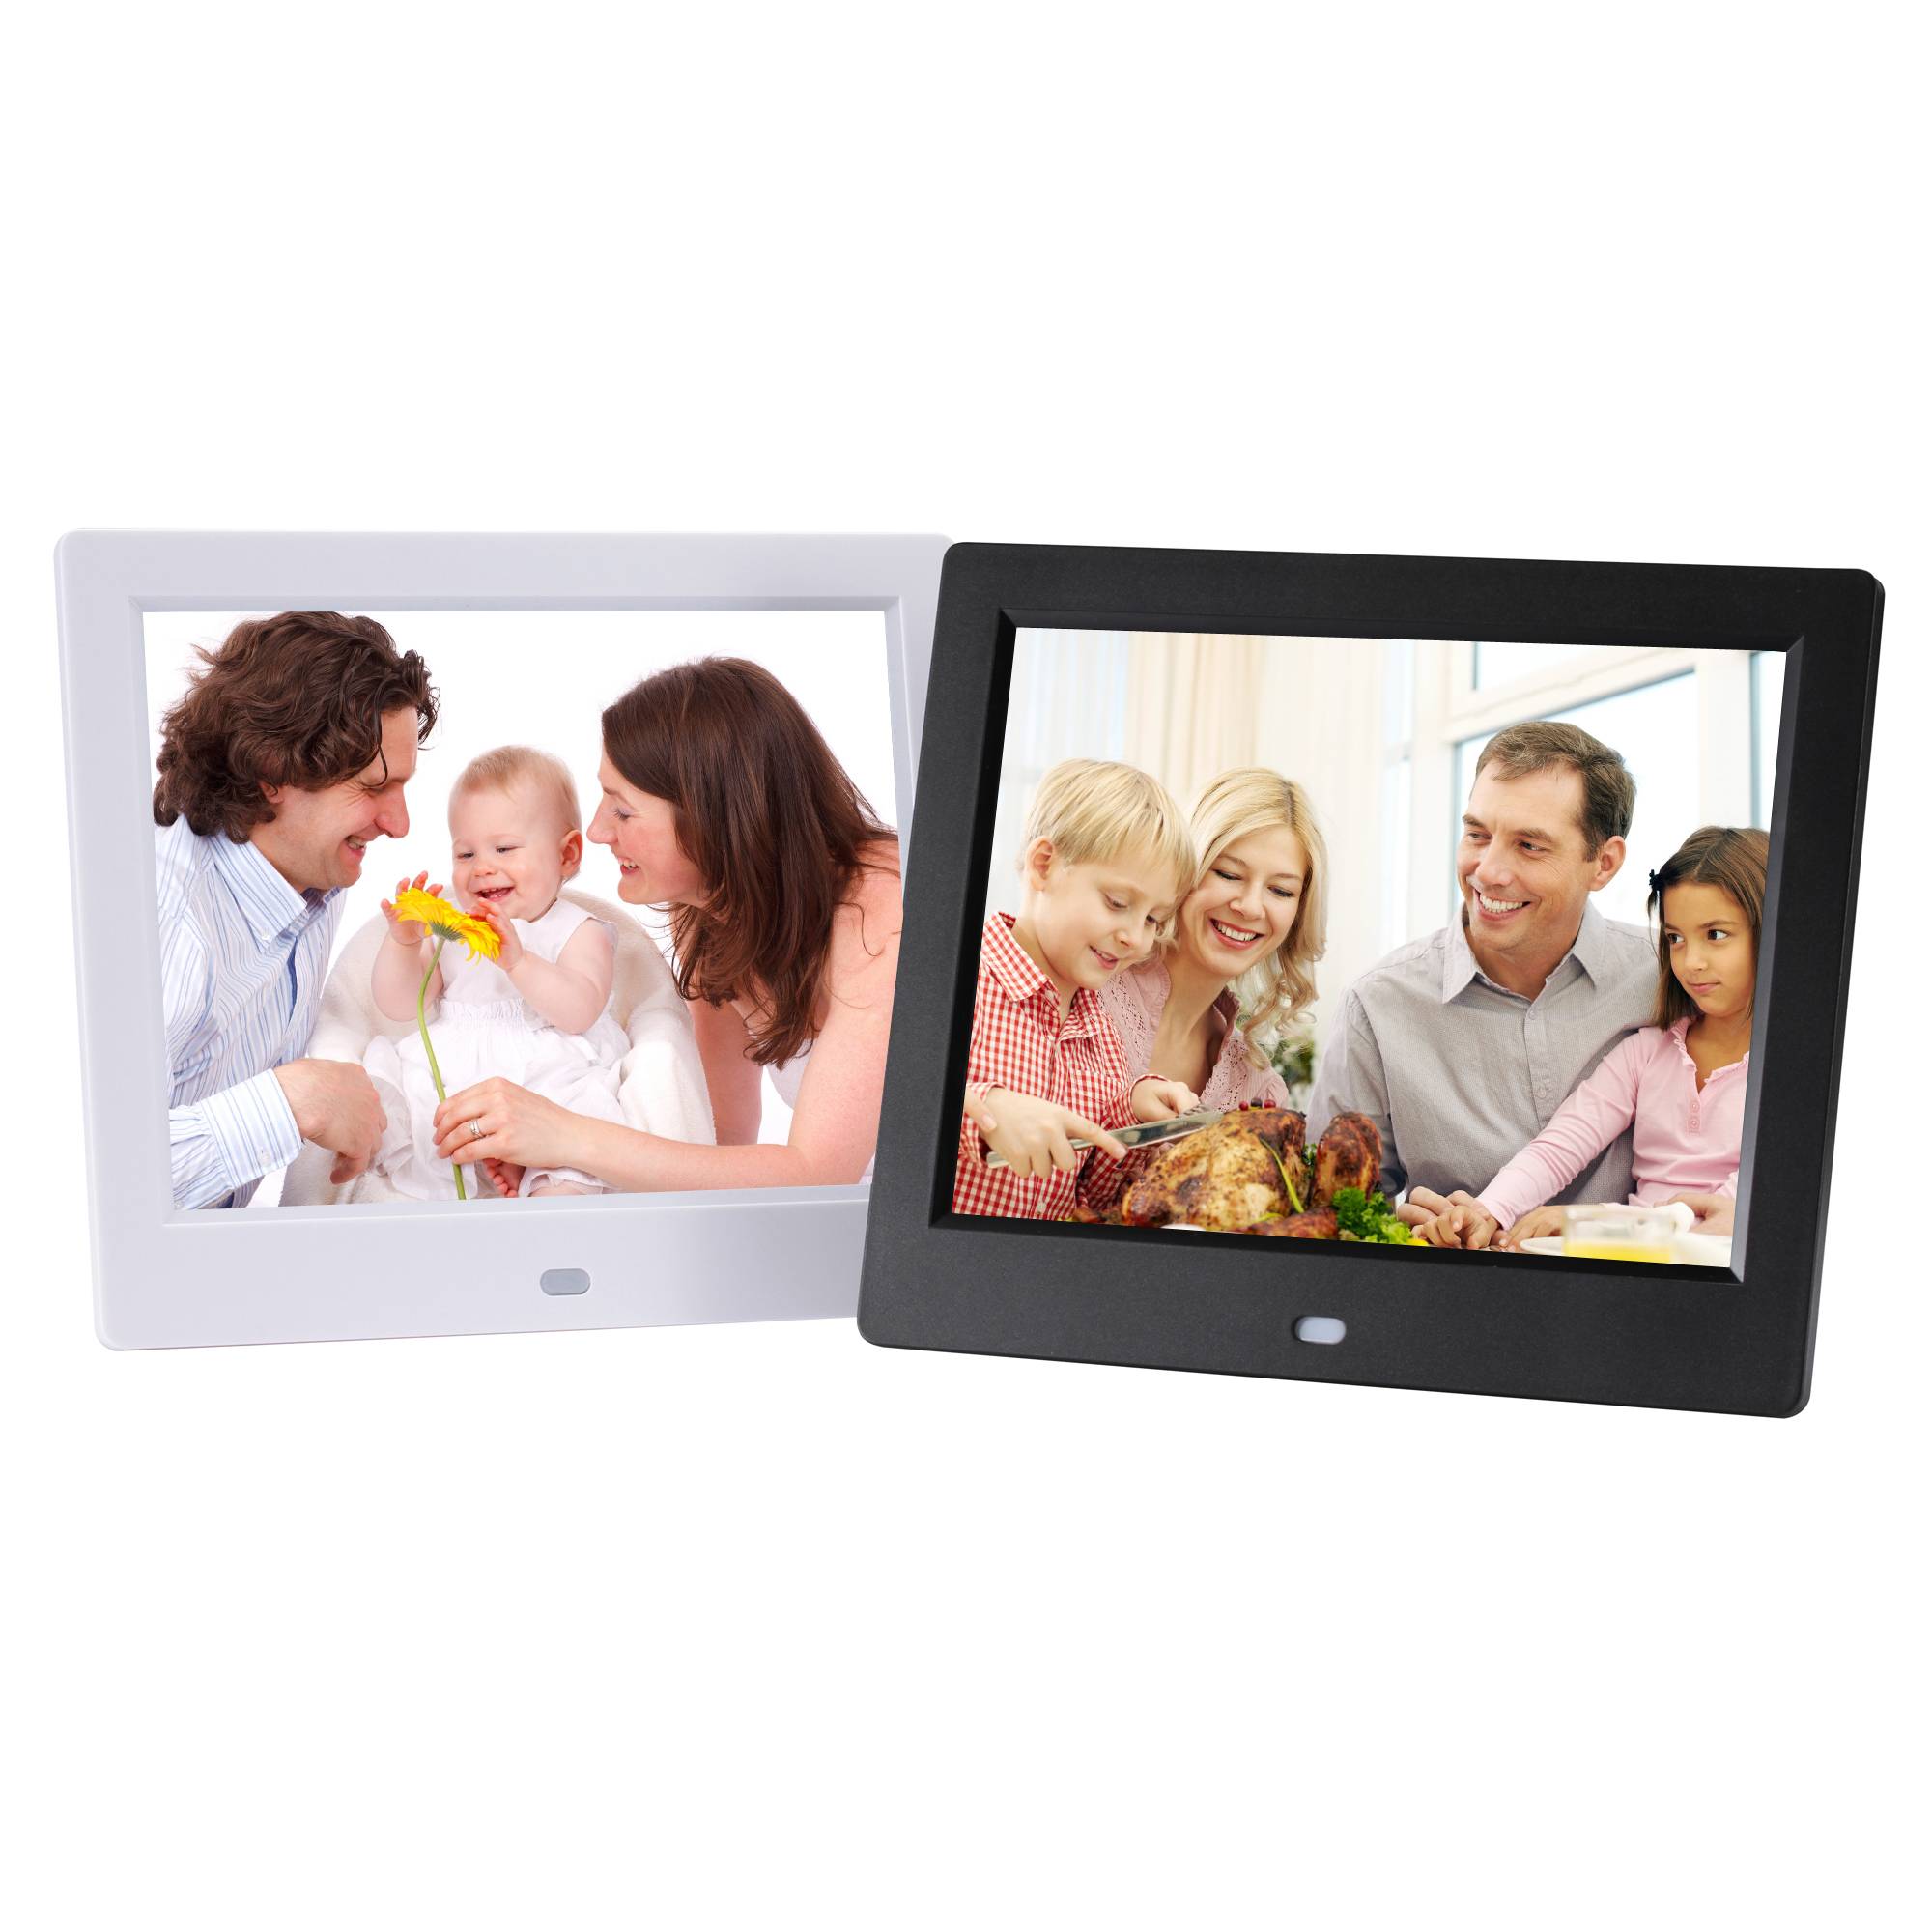 Wholesale Price China Smart Picture Frame - 8 inch slideshow cheap video player digital picture frame digital photo frame commercial advertising HD support 720P – Idealway